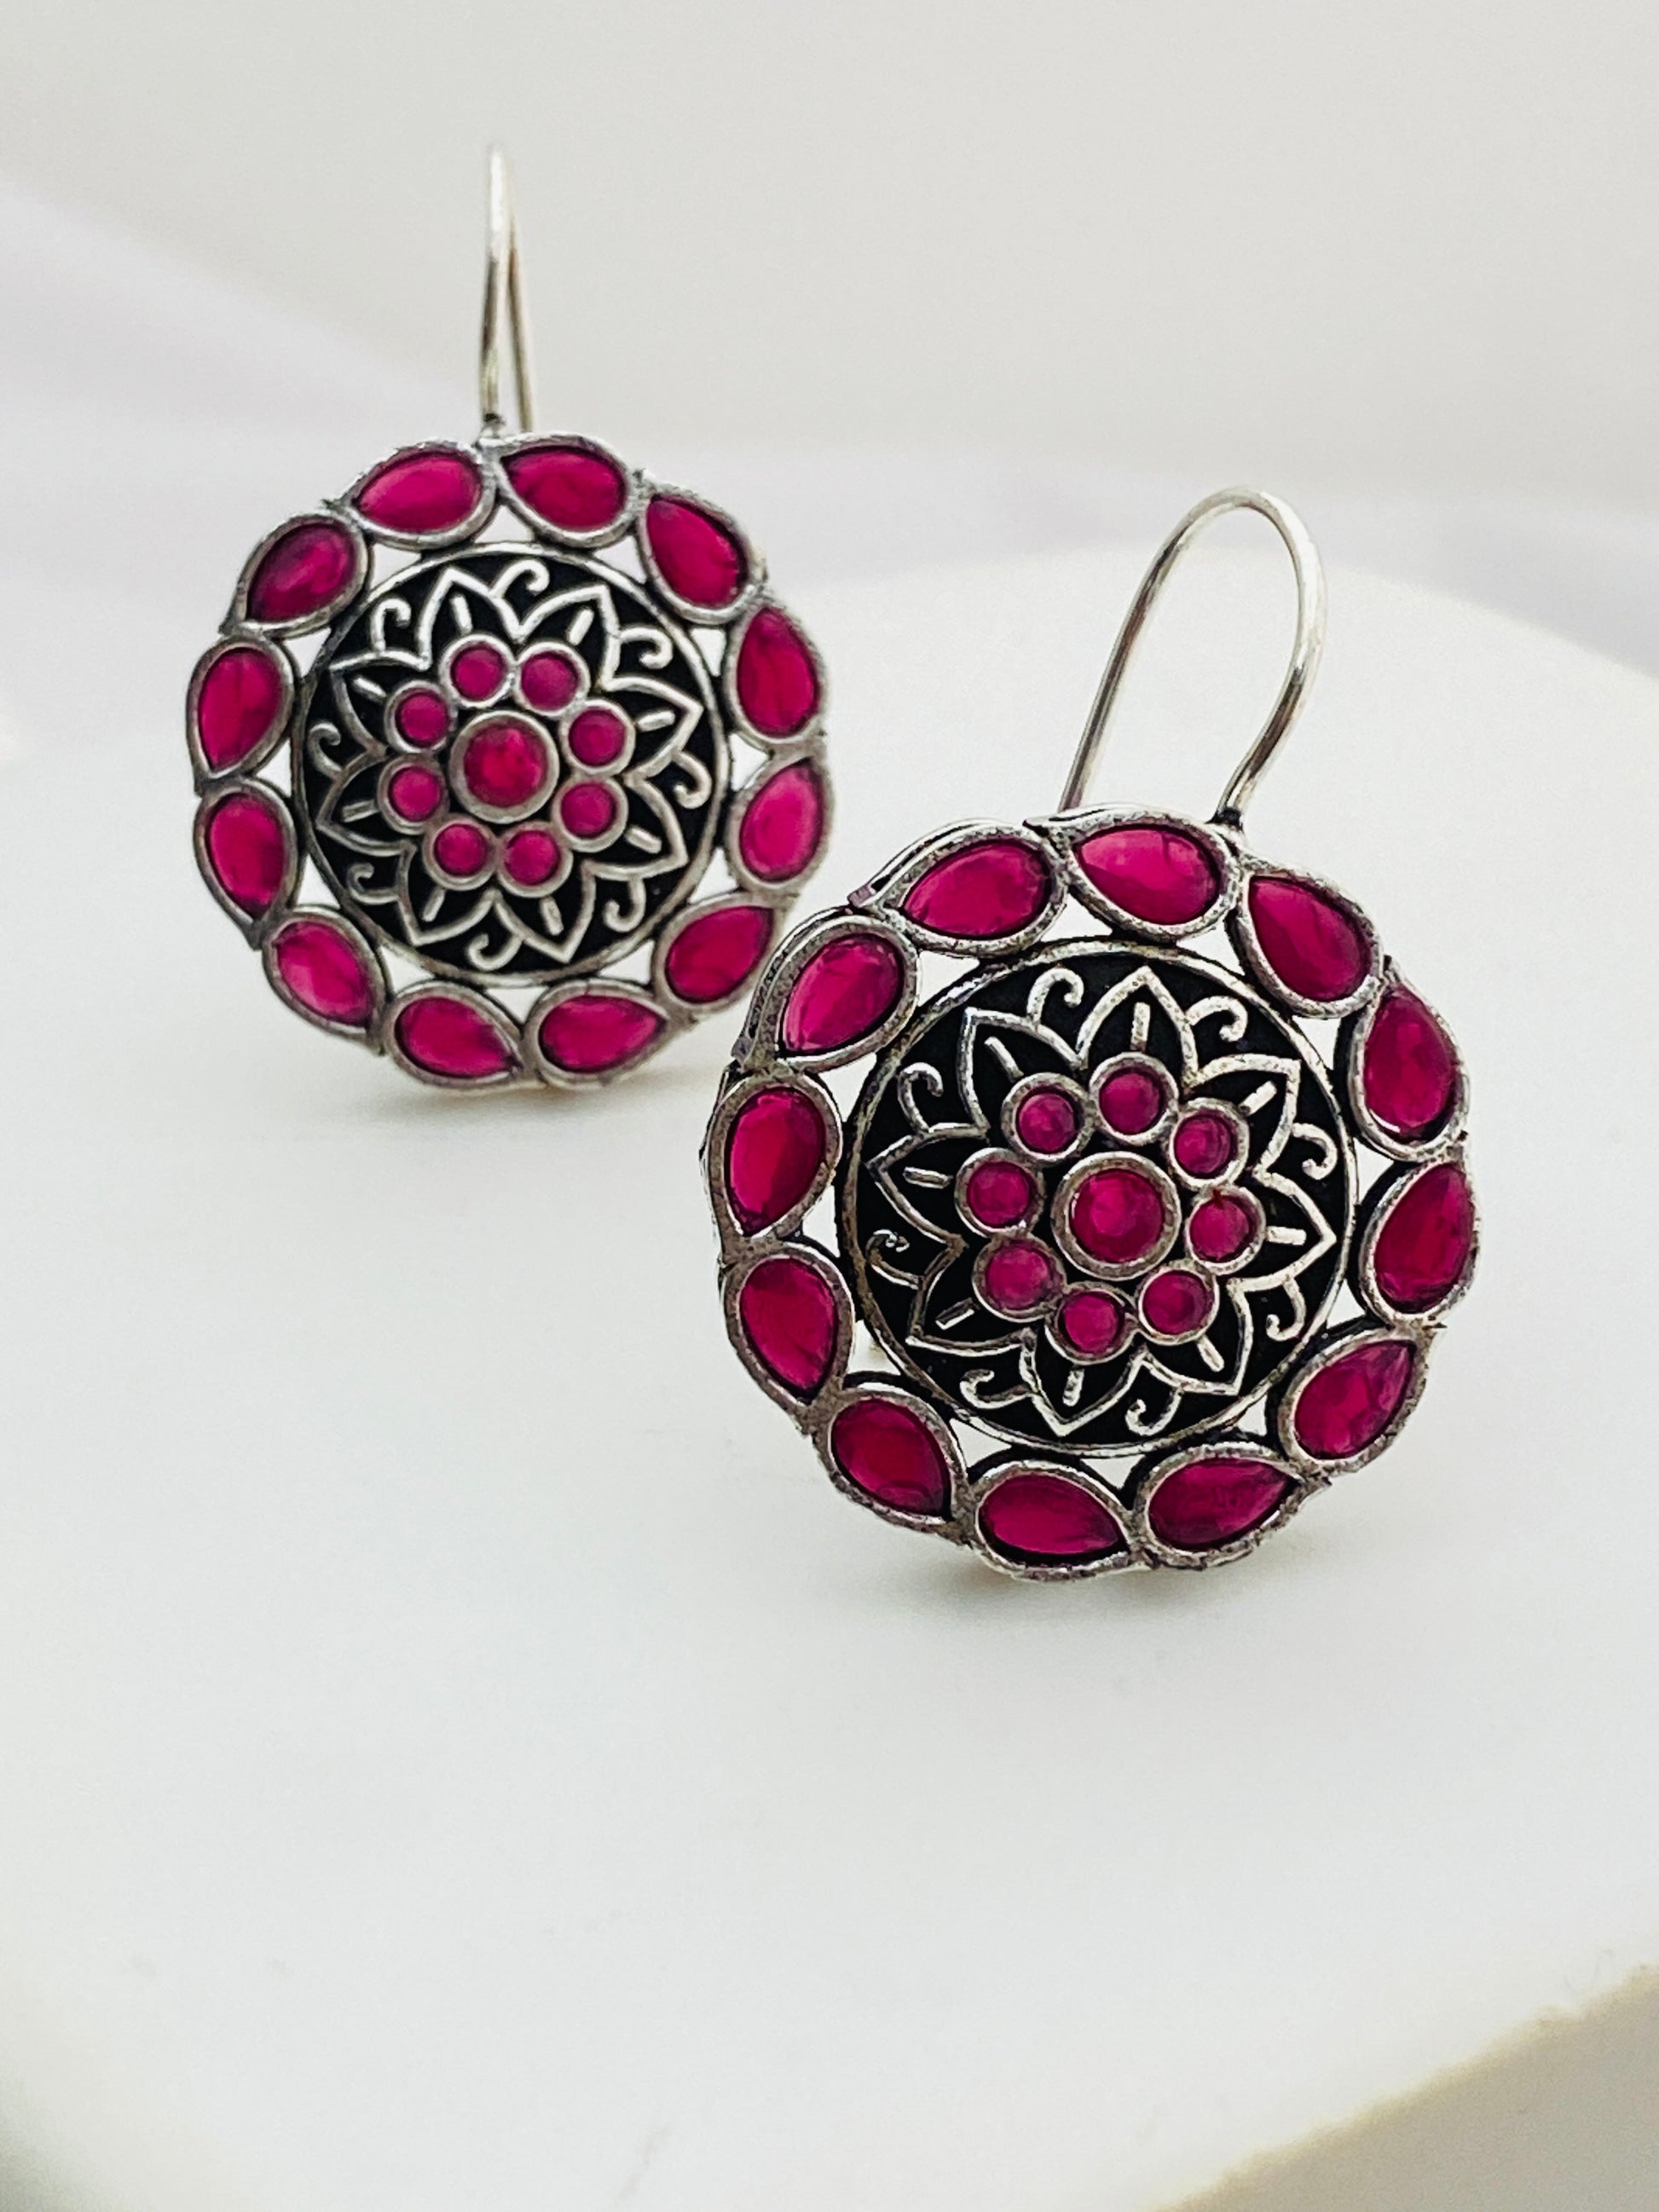 Attractive Pink Color Floral Design Silver Oxidized Earrings For Women